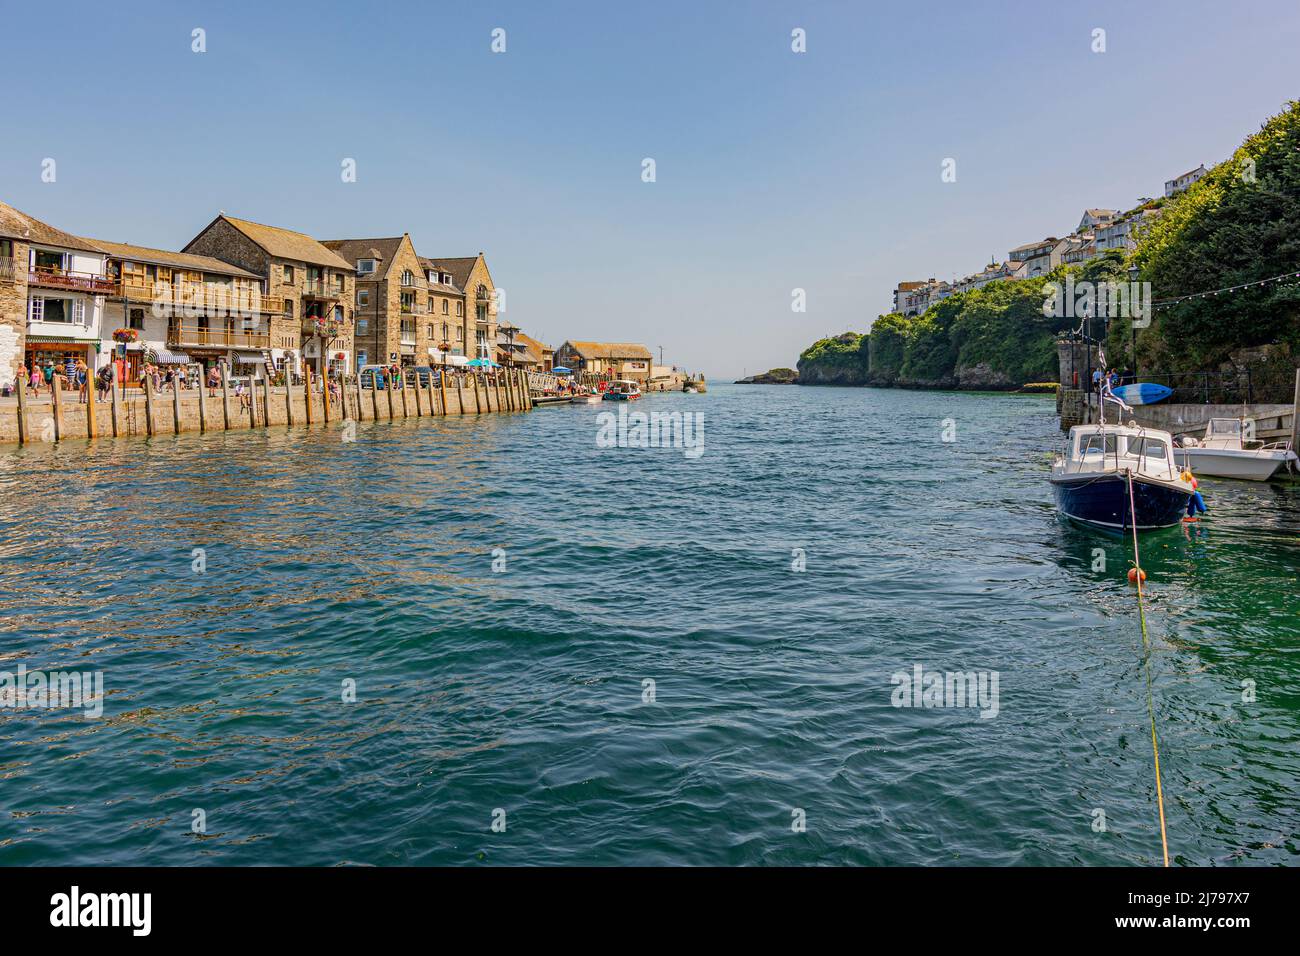 Looking south along the East Looe River towards the mouth of the river on a hot July day - Looe, Cornwall, UK. Stock Photo